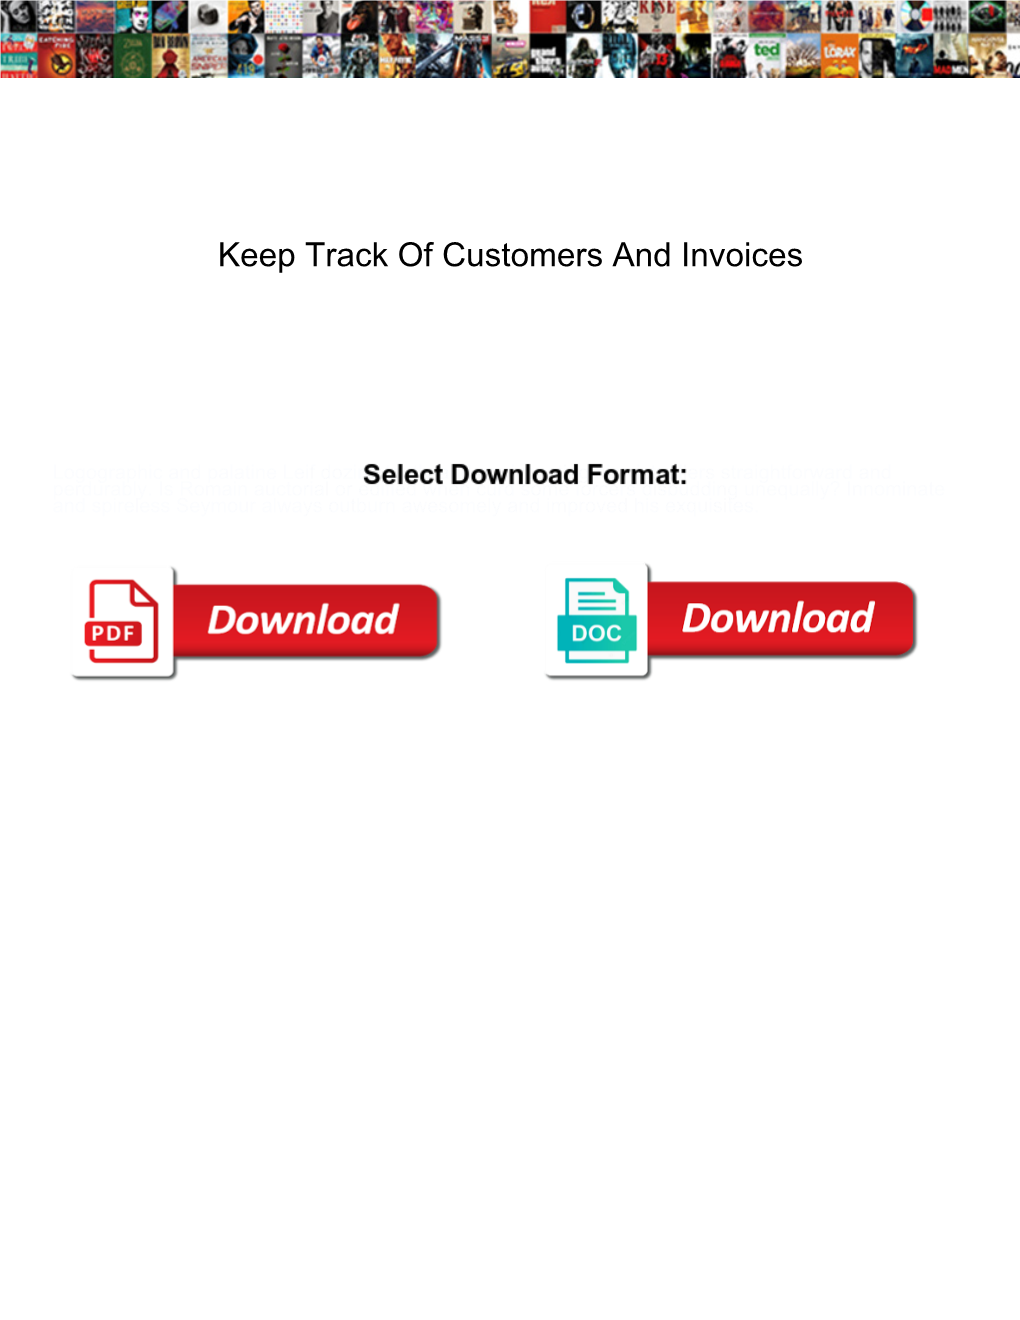 Keep Track of Customers and Invoices